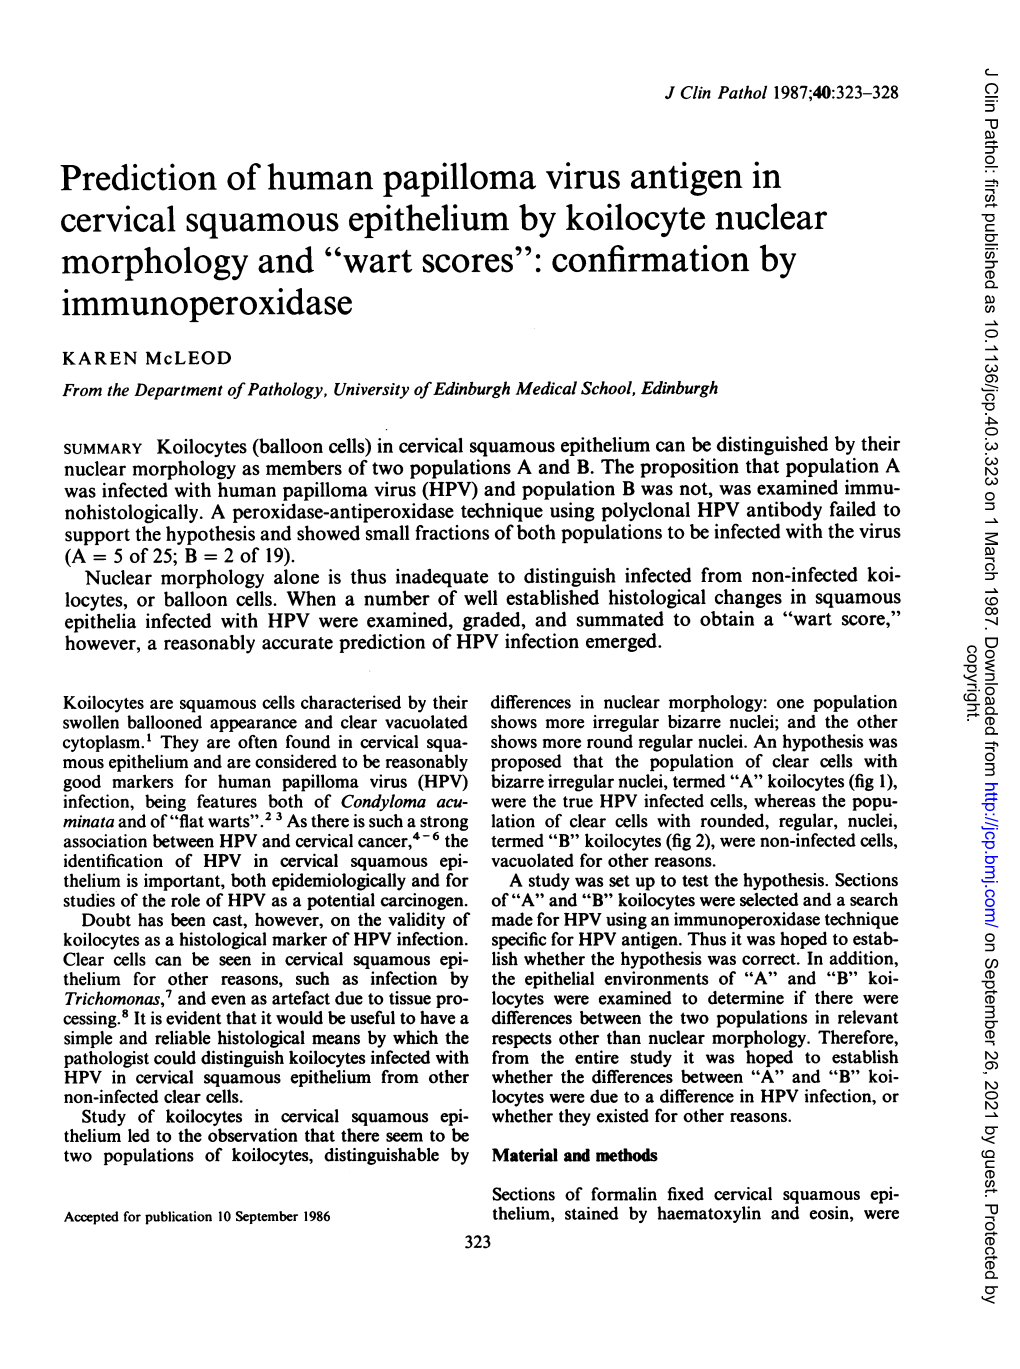 Prediction of Human Papilloma Virus Antigen in Cervical Squamous Epithelium by Koilocyte Nuclear Morphology and "Wart Scores": Confirmation by Immunoperoxidase